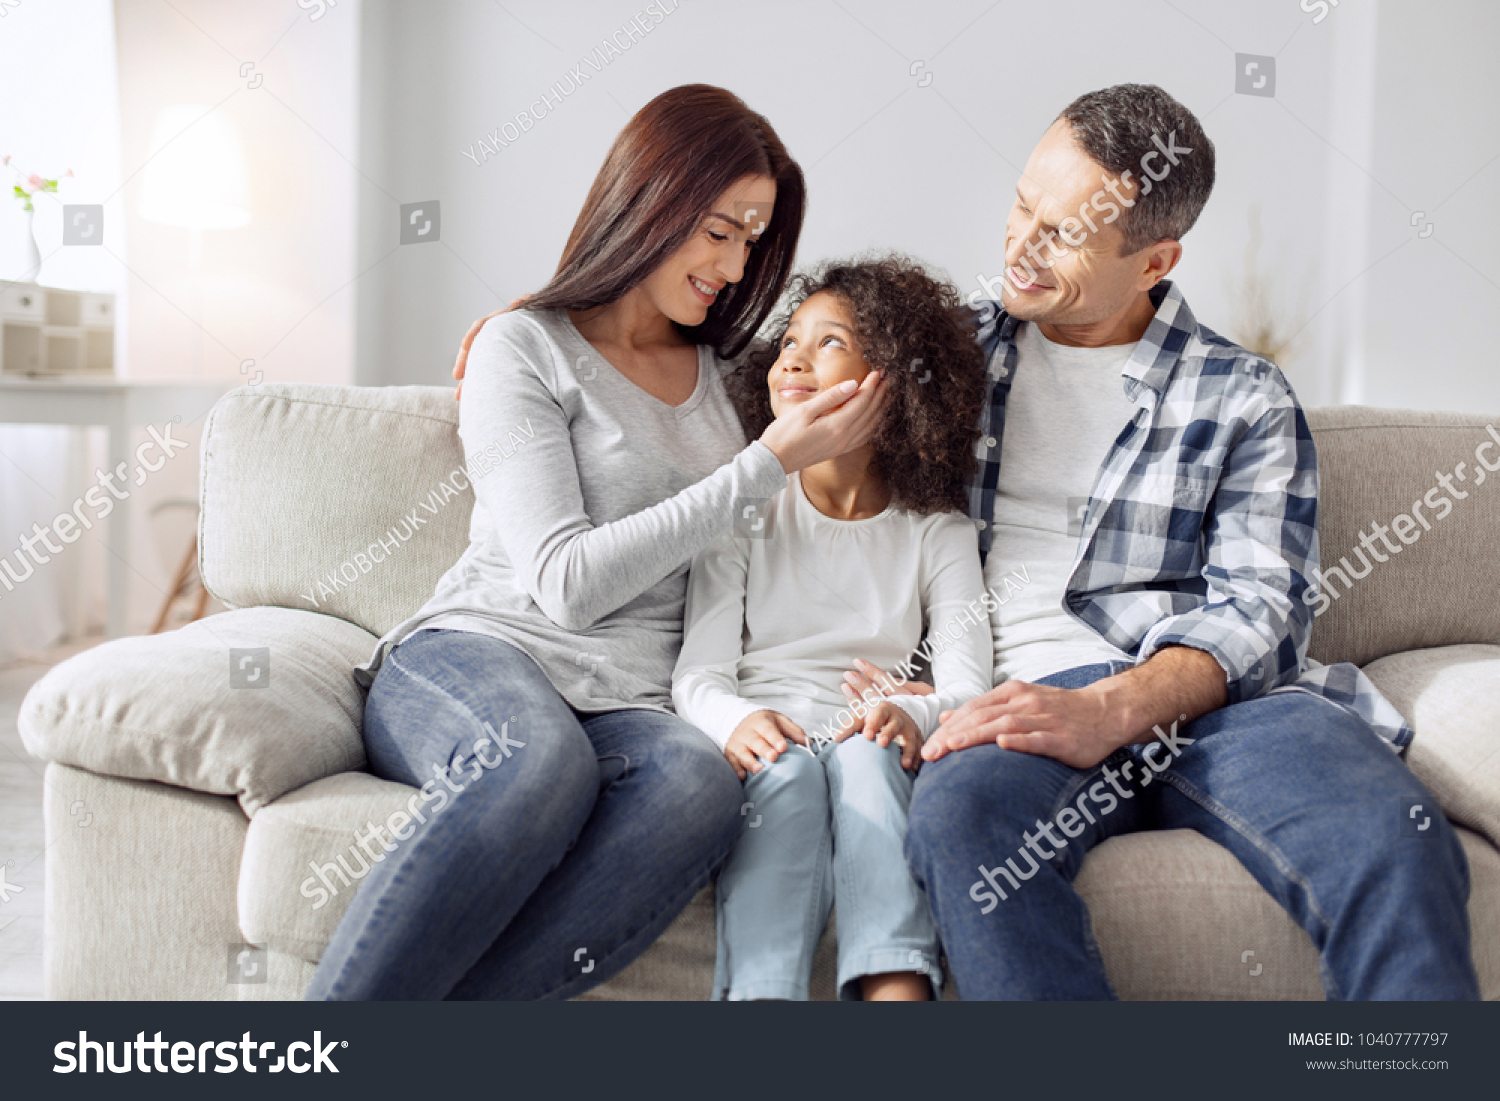 Our treasure. Attractive alert curly-haired girl smiling and sitting on the couch with her parents and they looking at her #1040777797